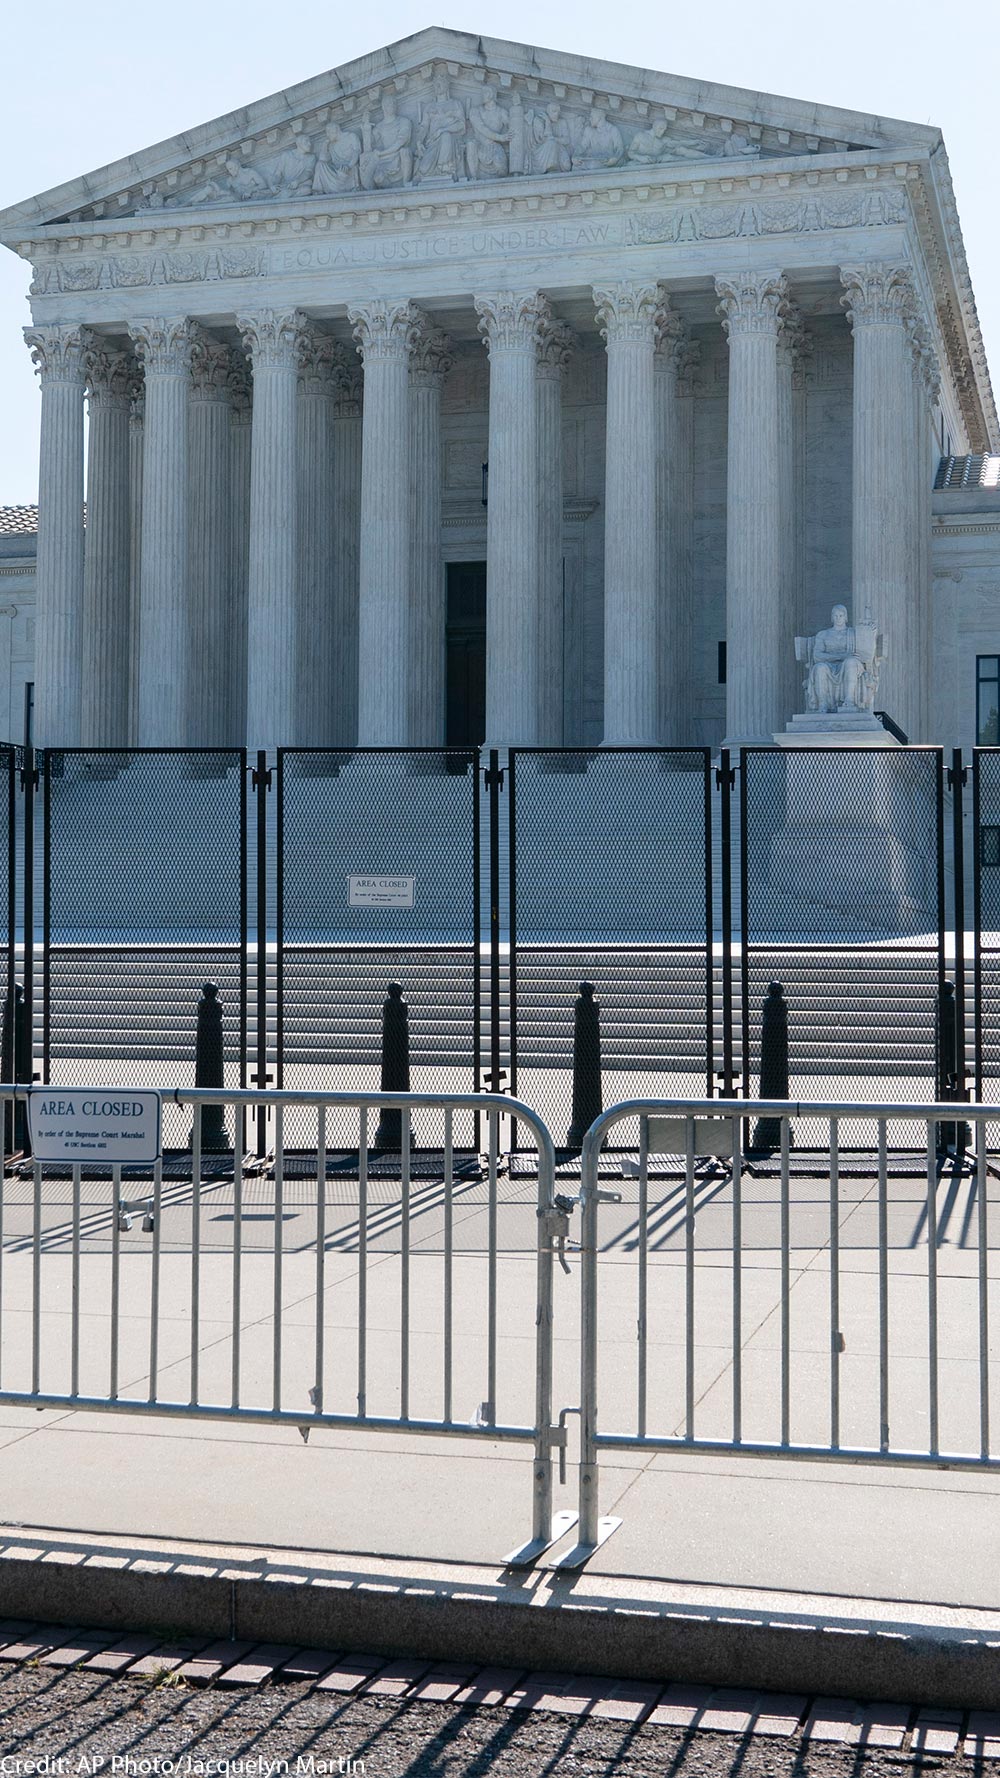 A view front of the U.S. Supreme Court Building behind riot gates.